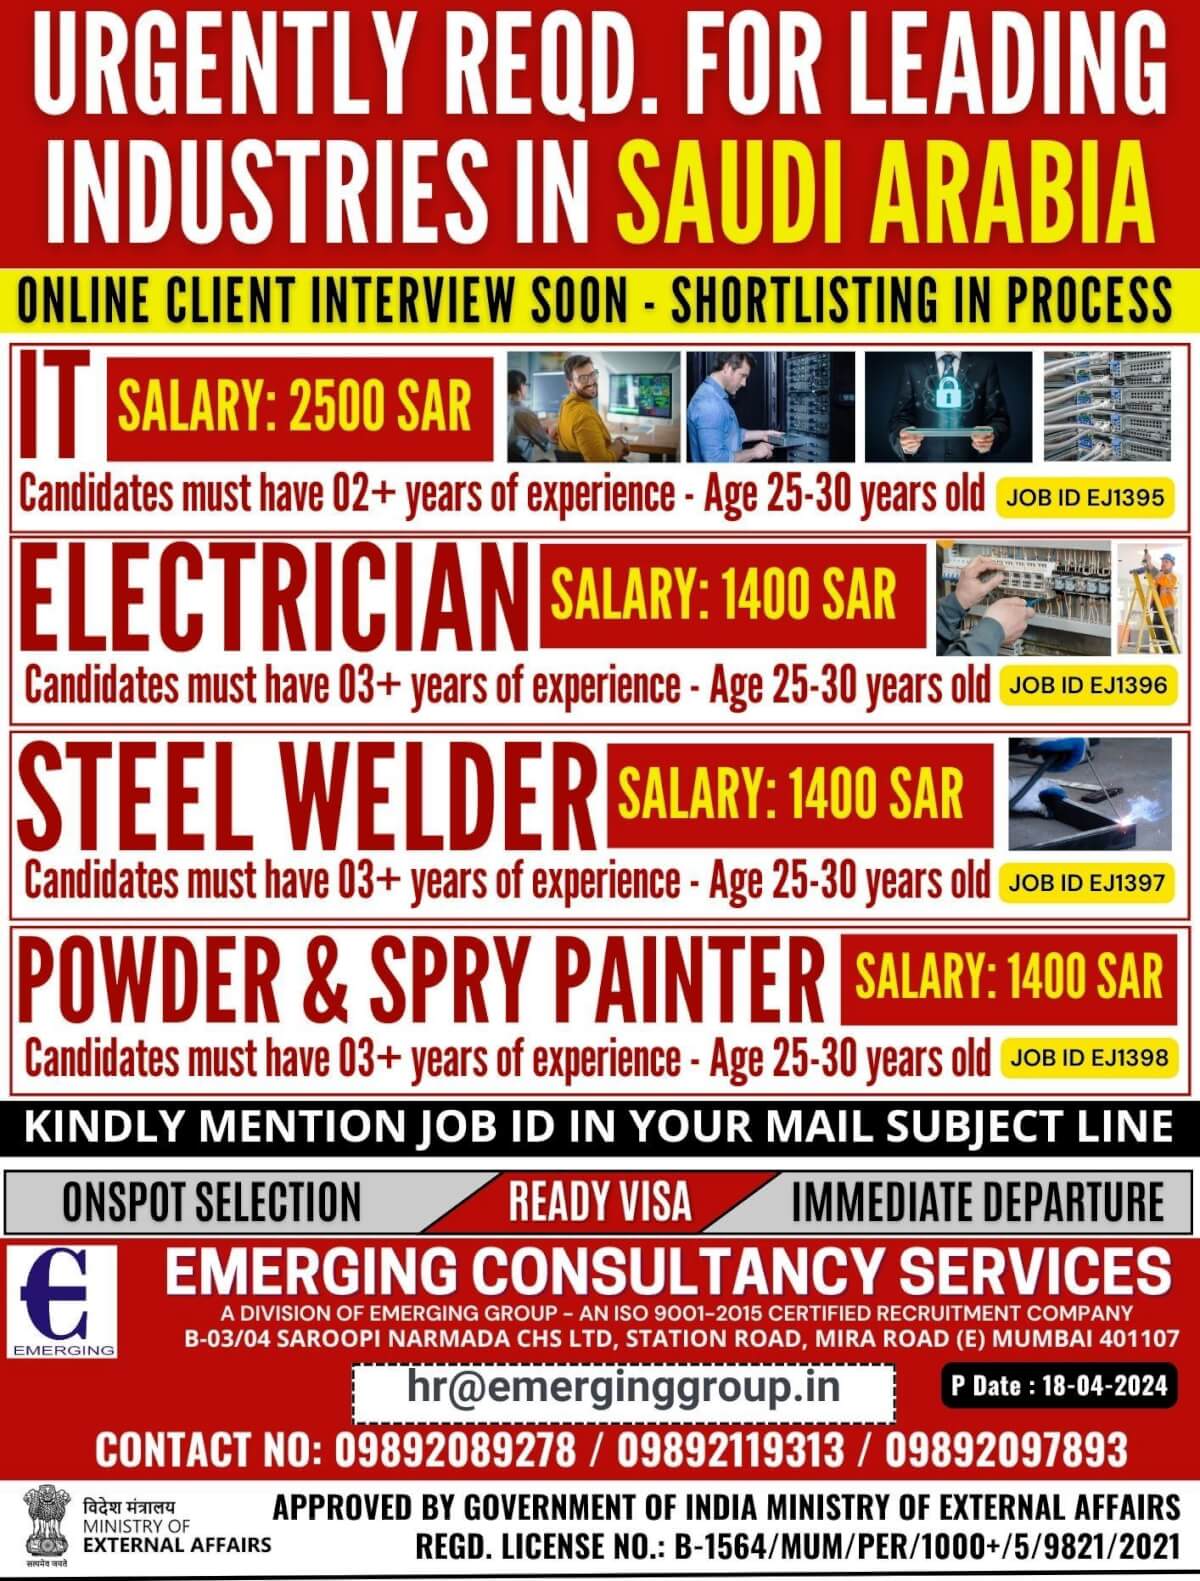 URGENTLY REQD. FOR LEADING INDUSTRIES IN SAUDI ARABIA